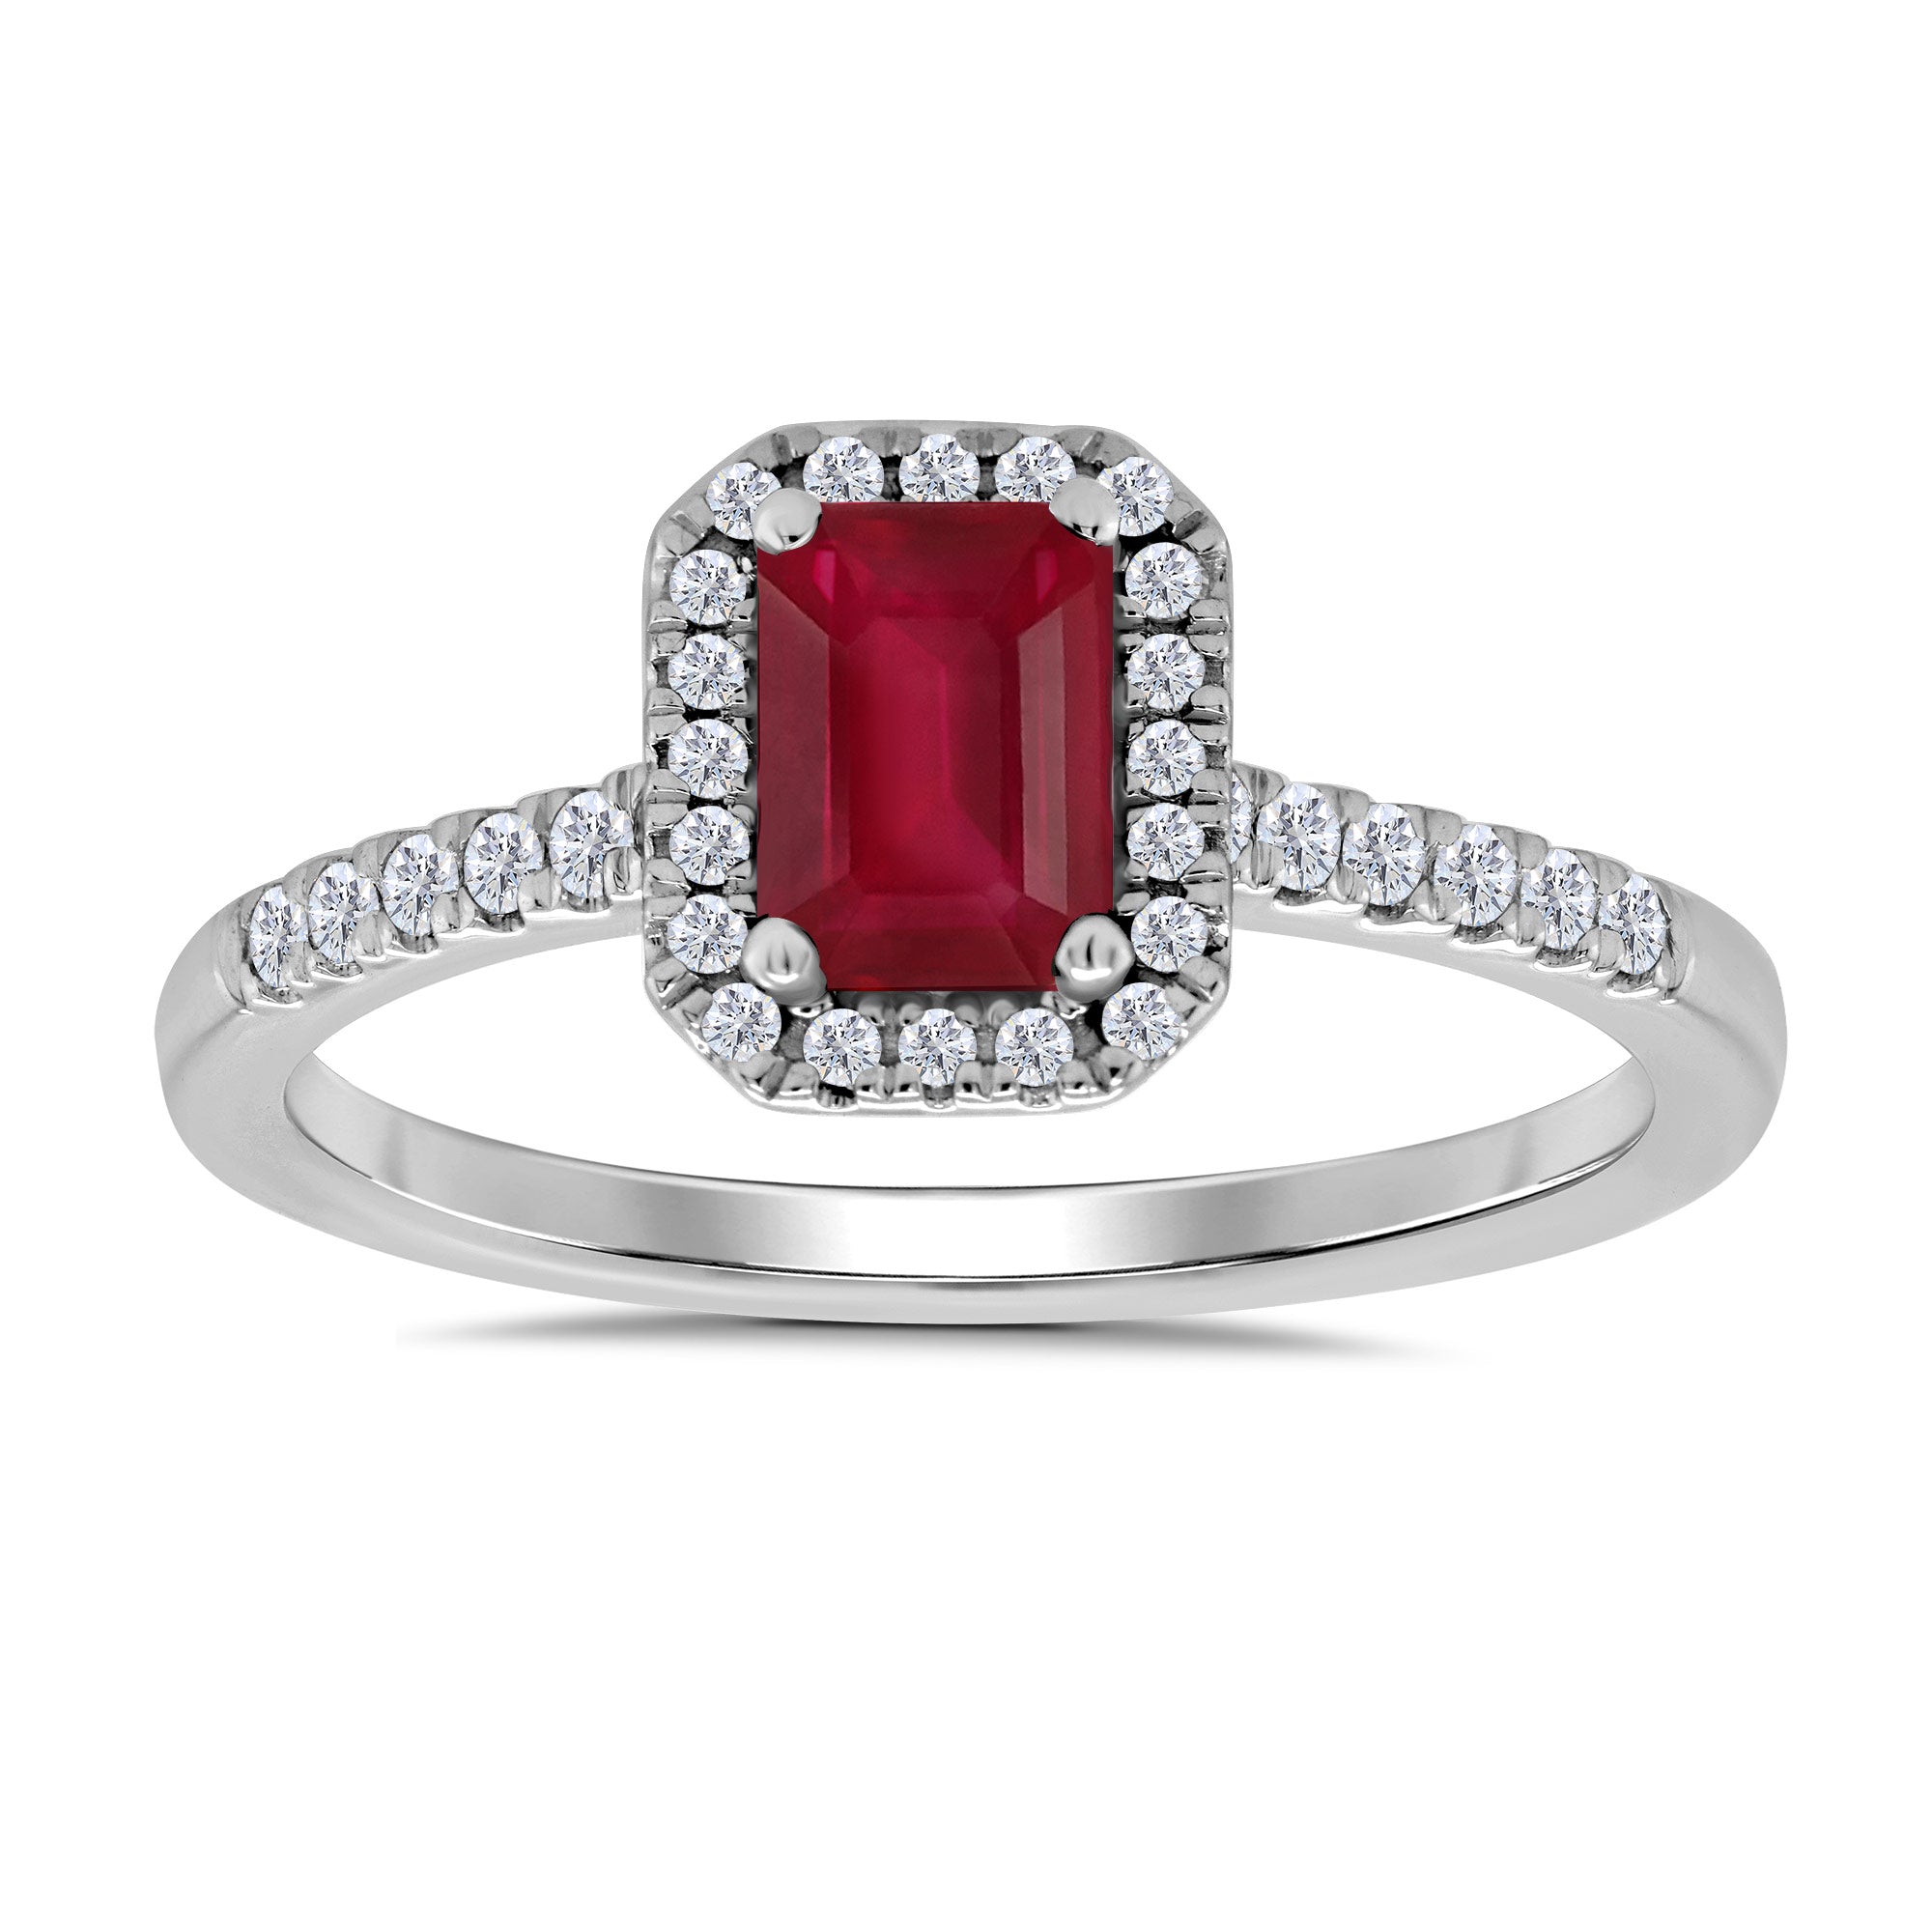 9ct white gold 6x4mm octagon ruby & diamond cluster ring with diamond set shoulders 0.20ct